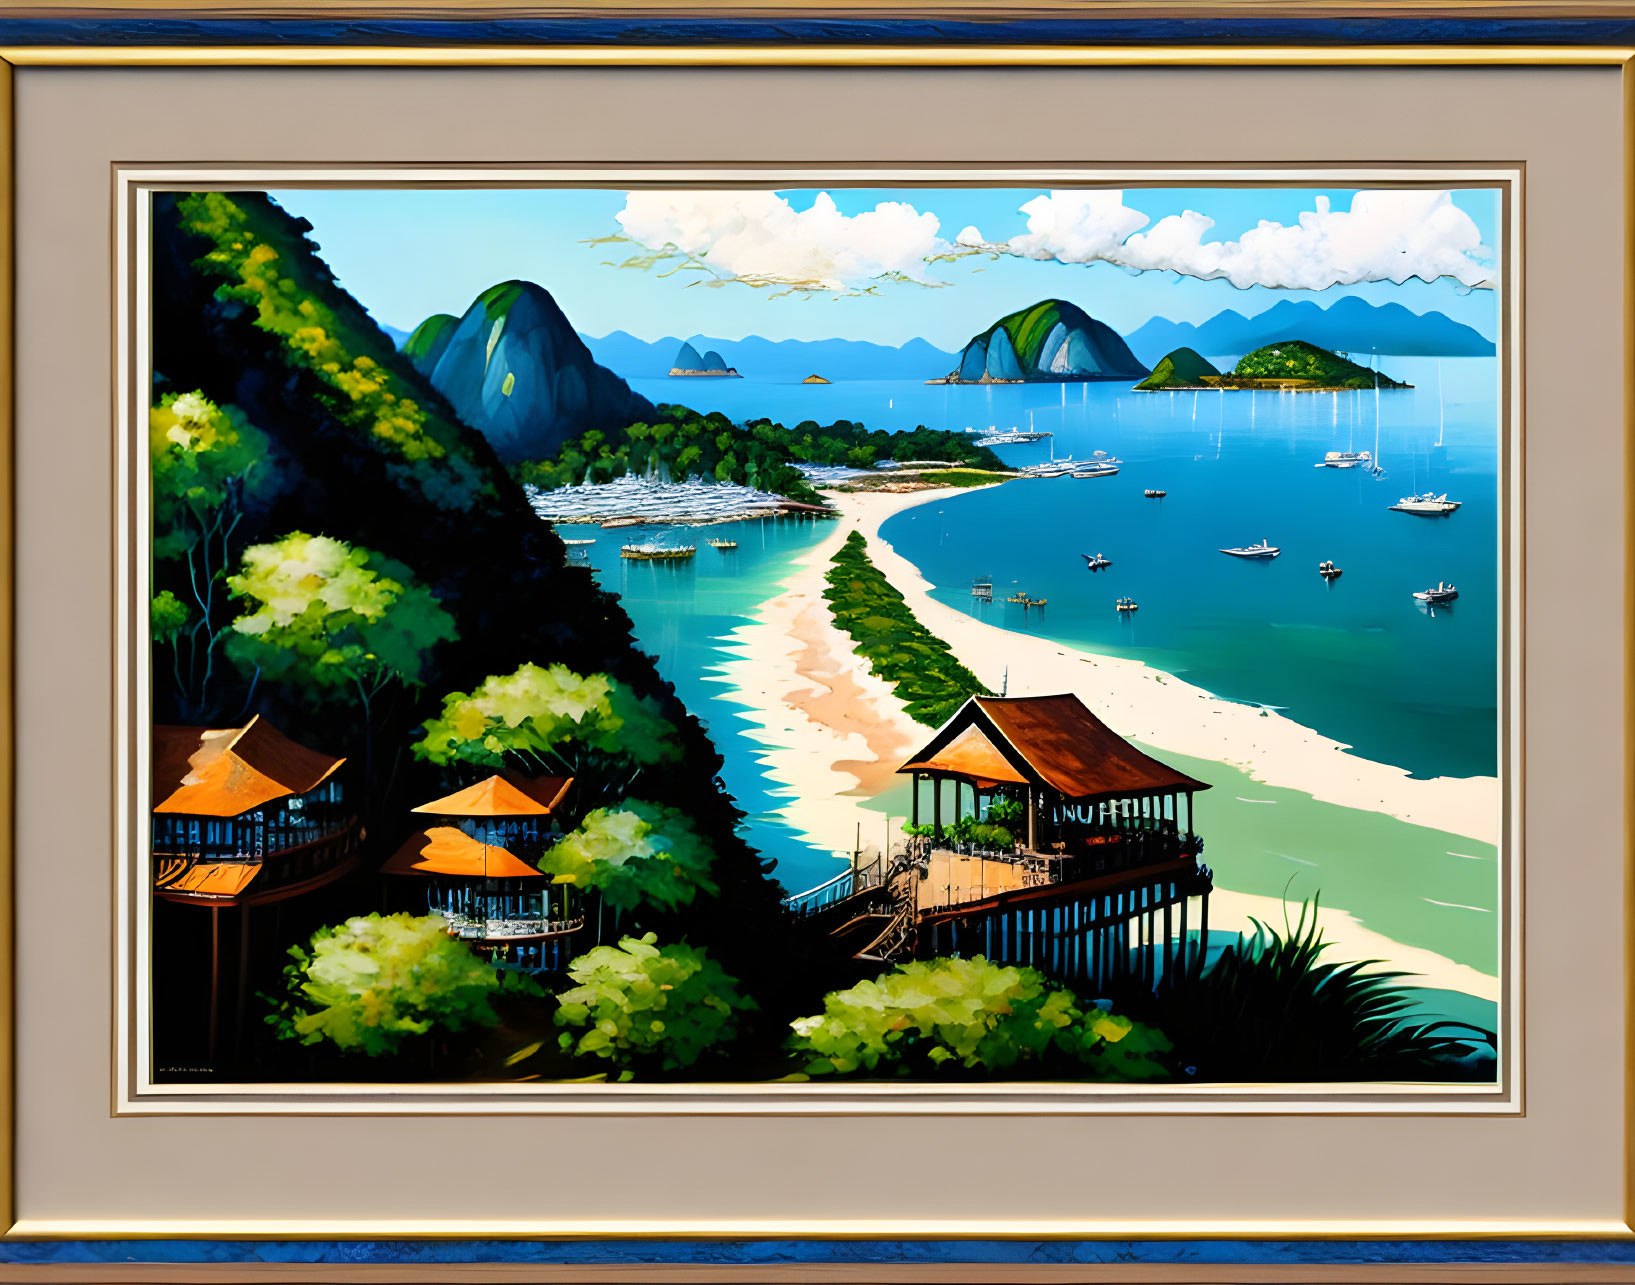 Colorful Coastal Landscape with Greenery, Huts, Beach, Boats, and Mountains